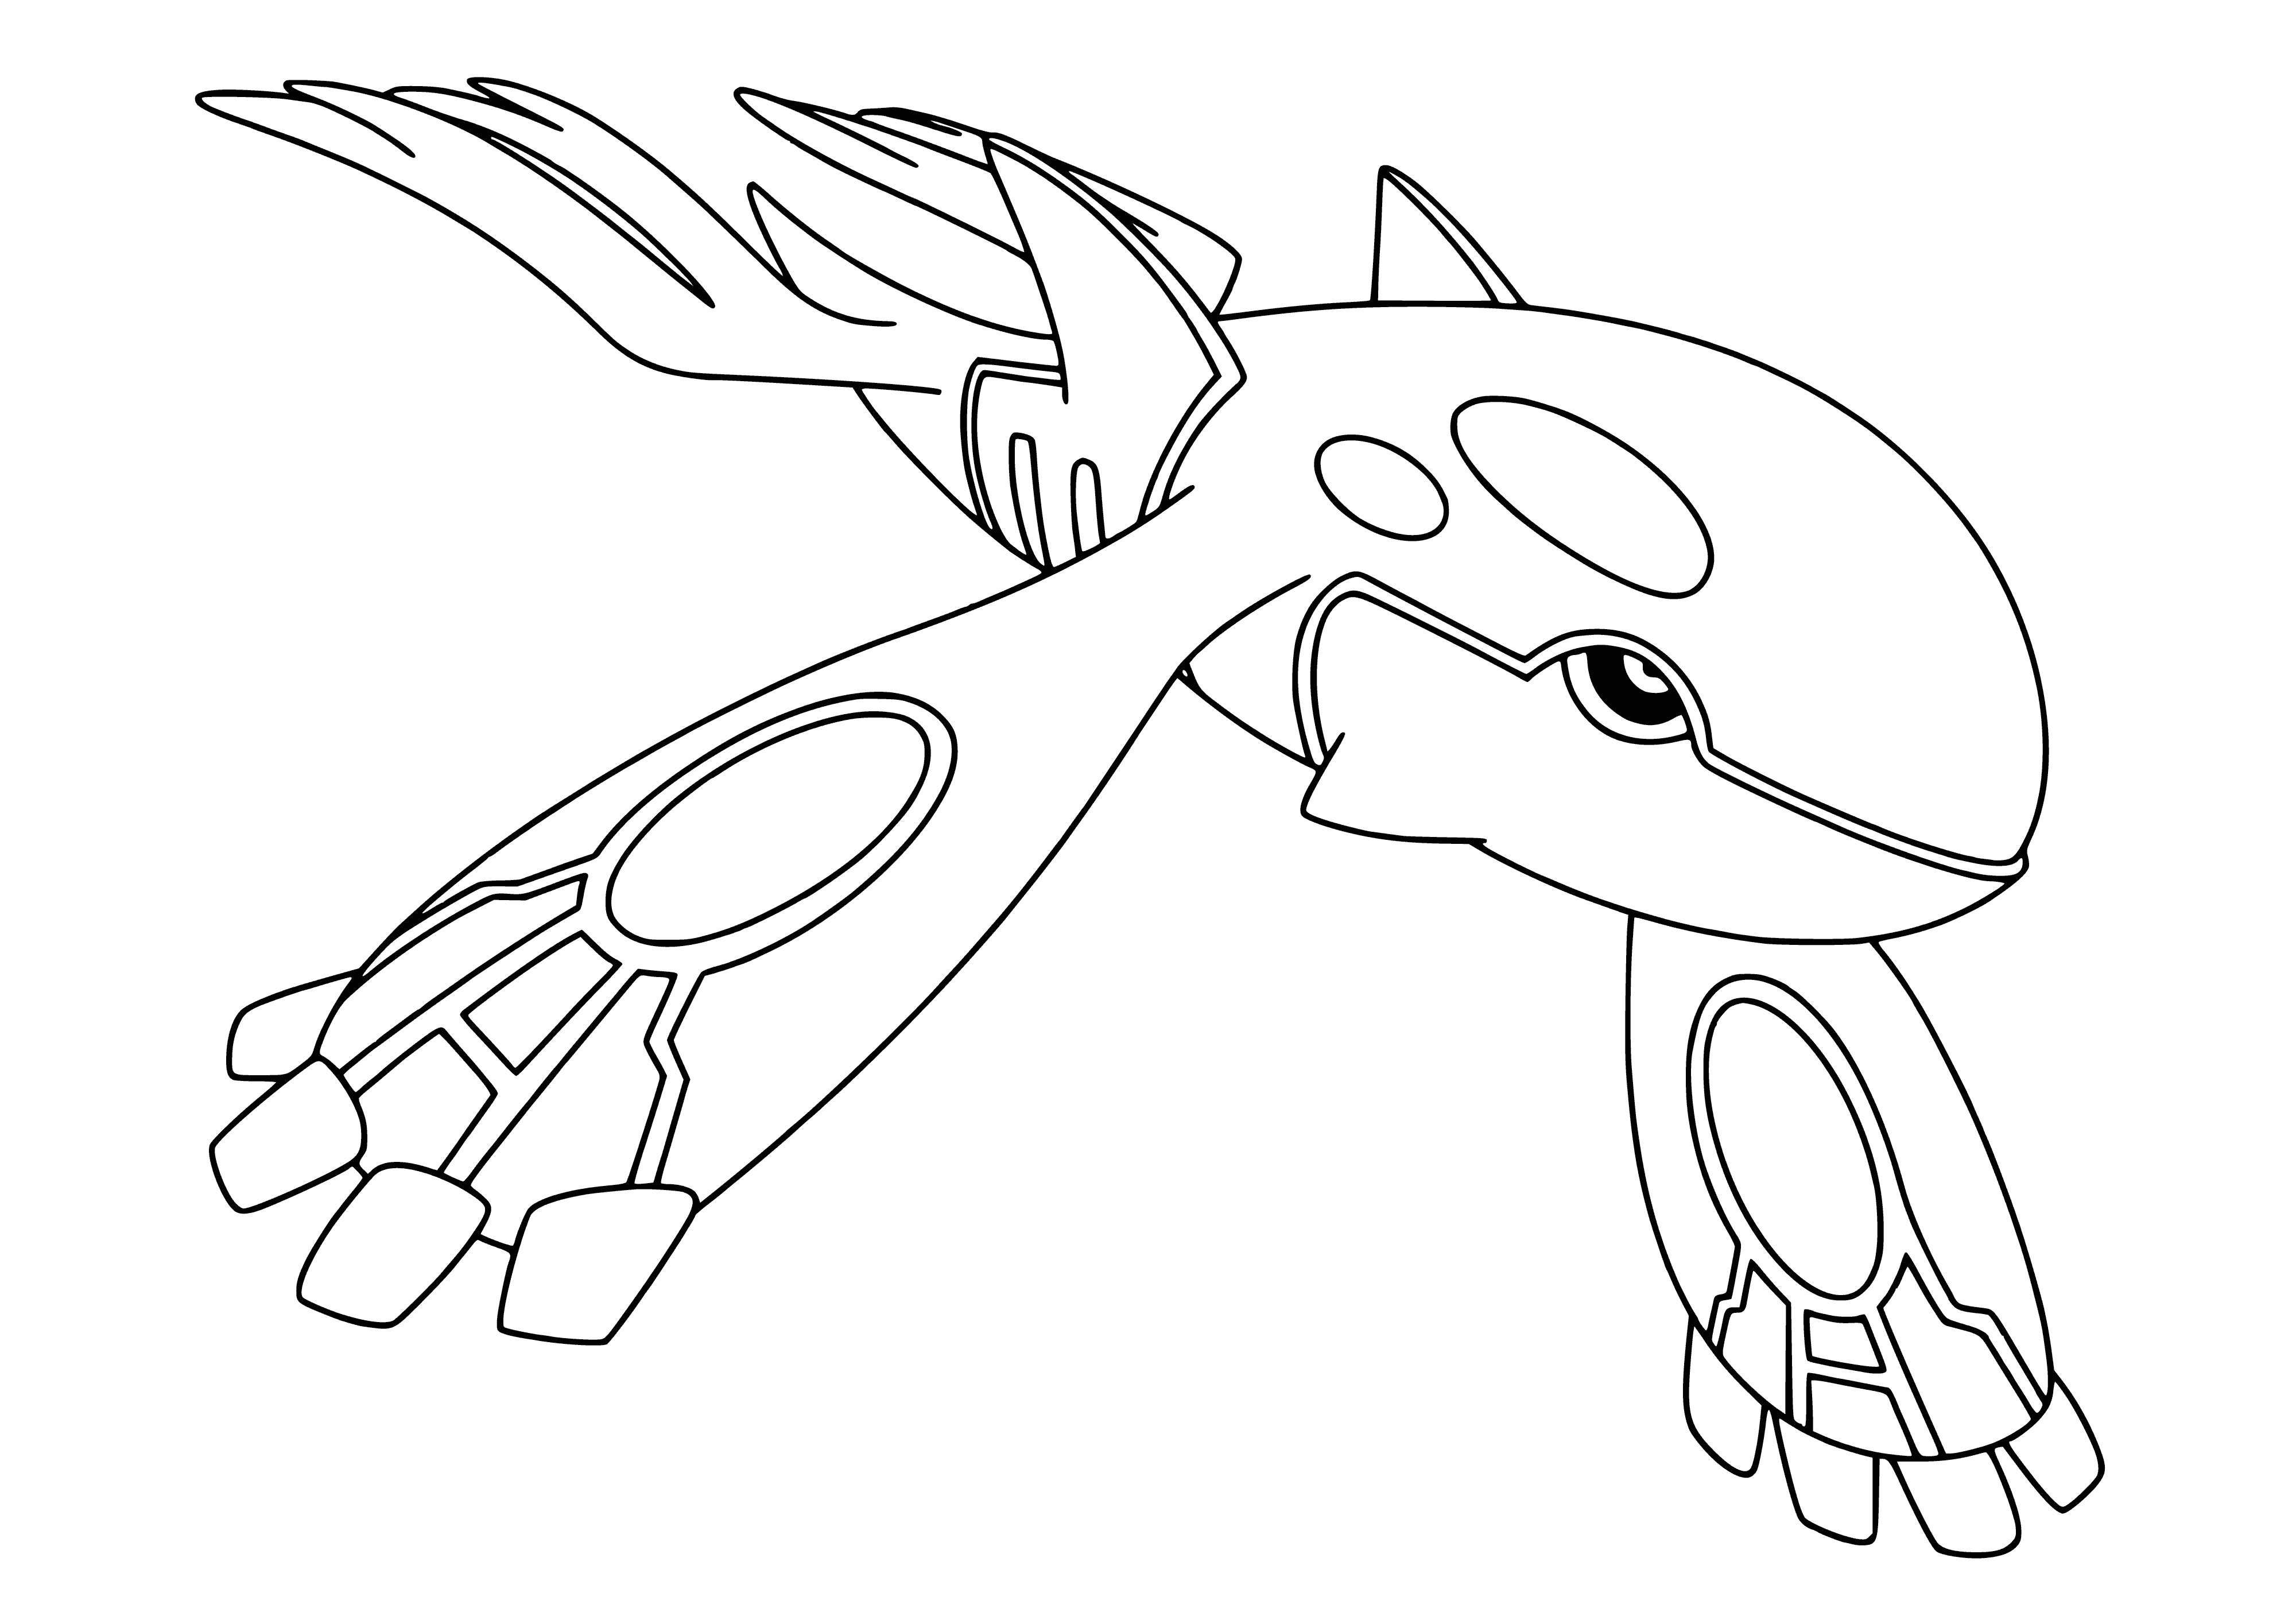 coloring page: Kyogre is a Legendary Pokemon of the Sinnoh region, a massive blue whale-like creature with a white underbelly & large fins. Its power can raise continents above the sea, & is known as the "Sky High Pokemon."